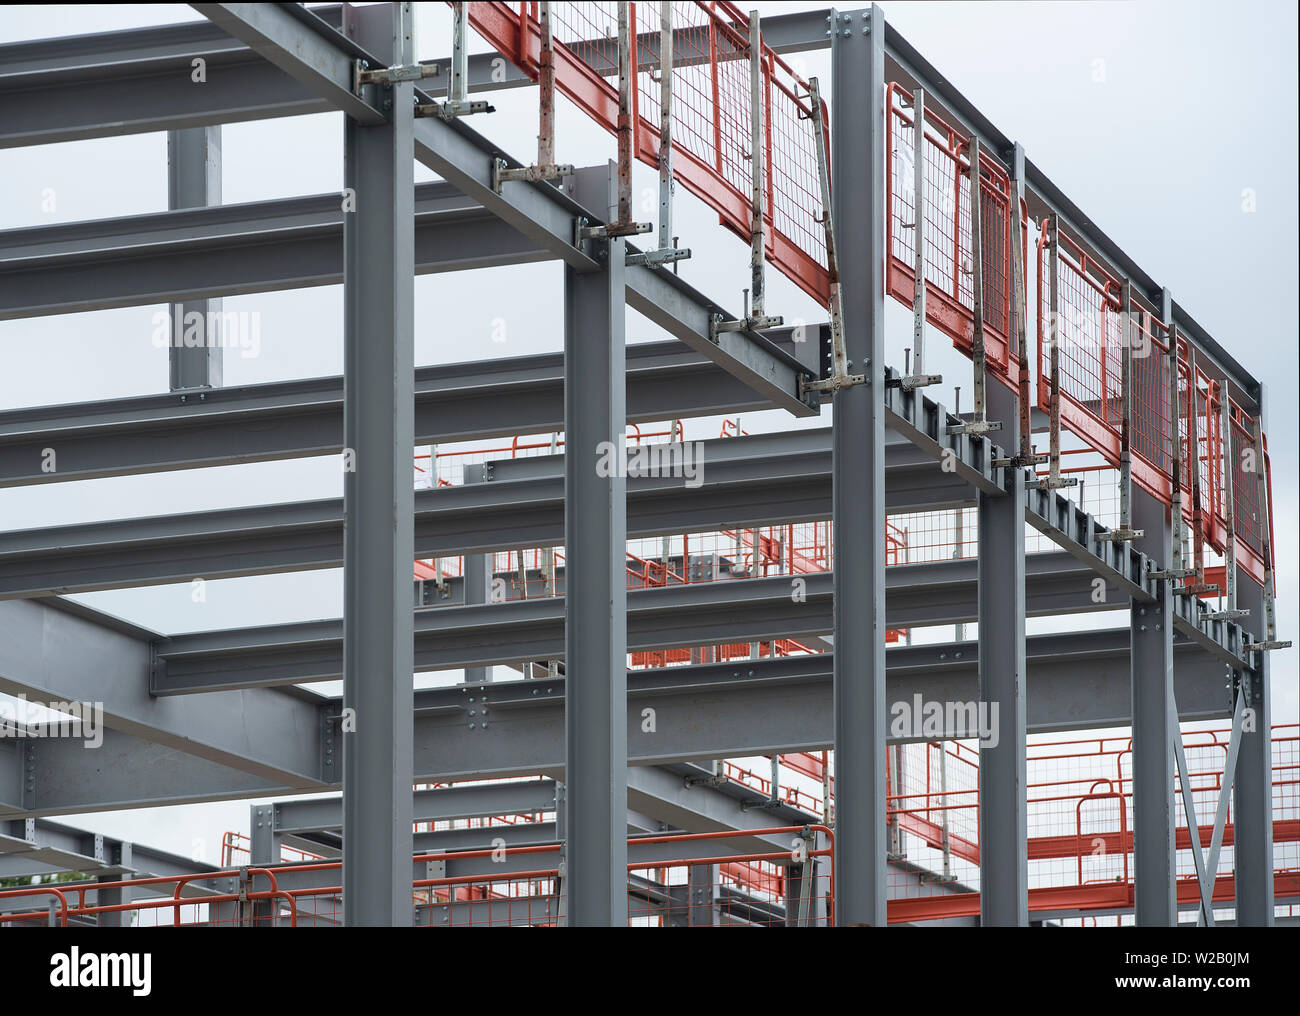 The construction of a large building with RSJs / rolled steel joists / steel girders. Stock Photo